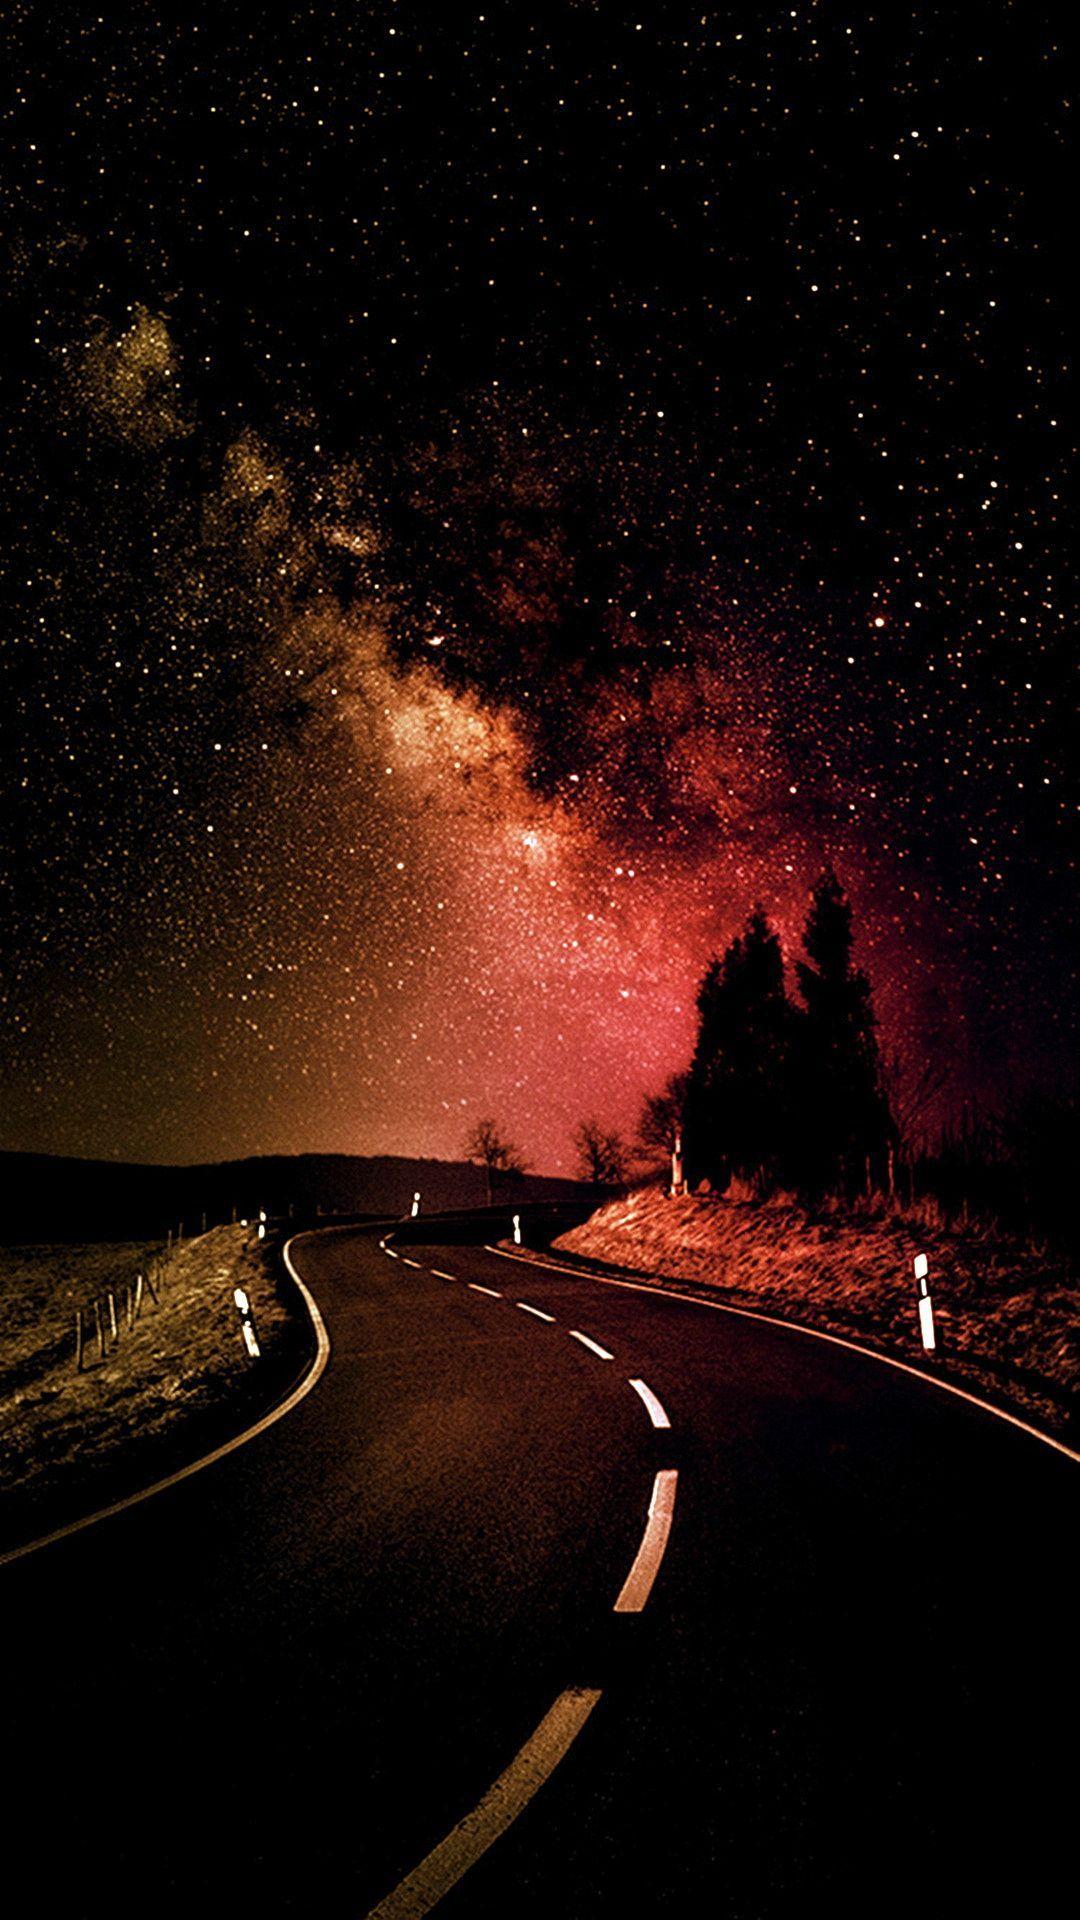 Road to eternity. Tap to see more beautiful Nature Apple iPhone 6s Plus HD wallpaper, background, fondos. - Wallpaper background, Galaxy wallpaper, Wallpaper